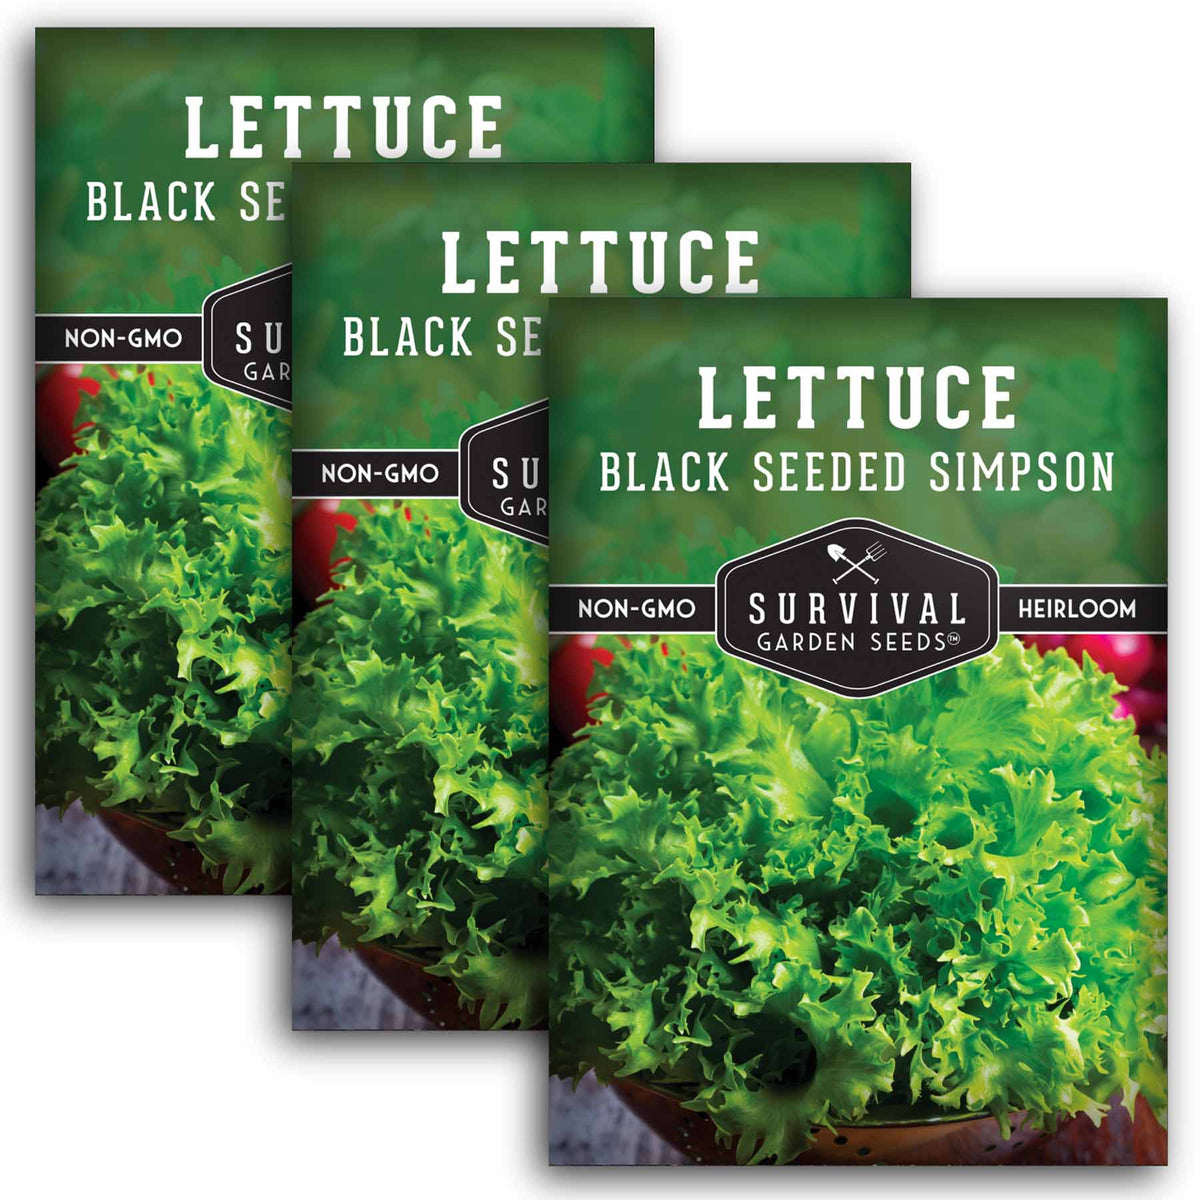 3 packets of Black Seeded Simpson Lettuce seeds